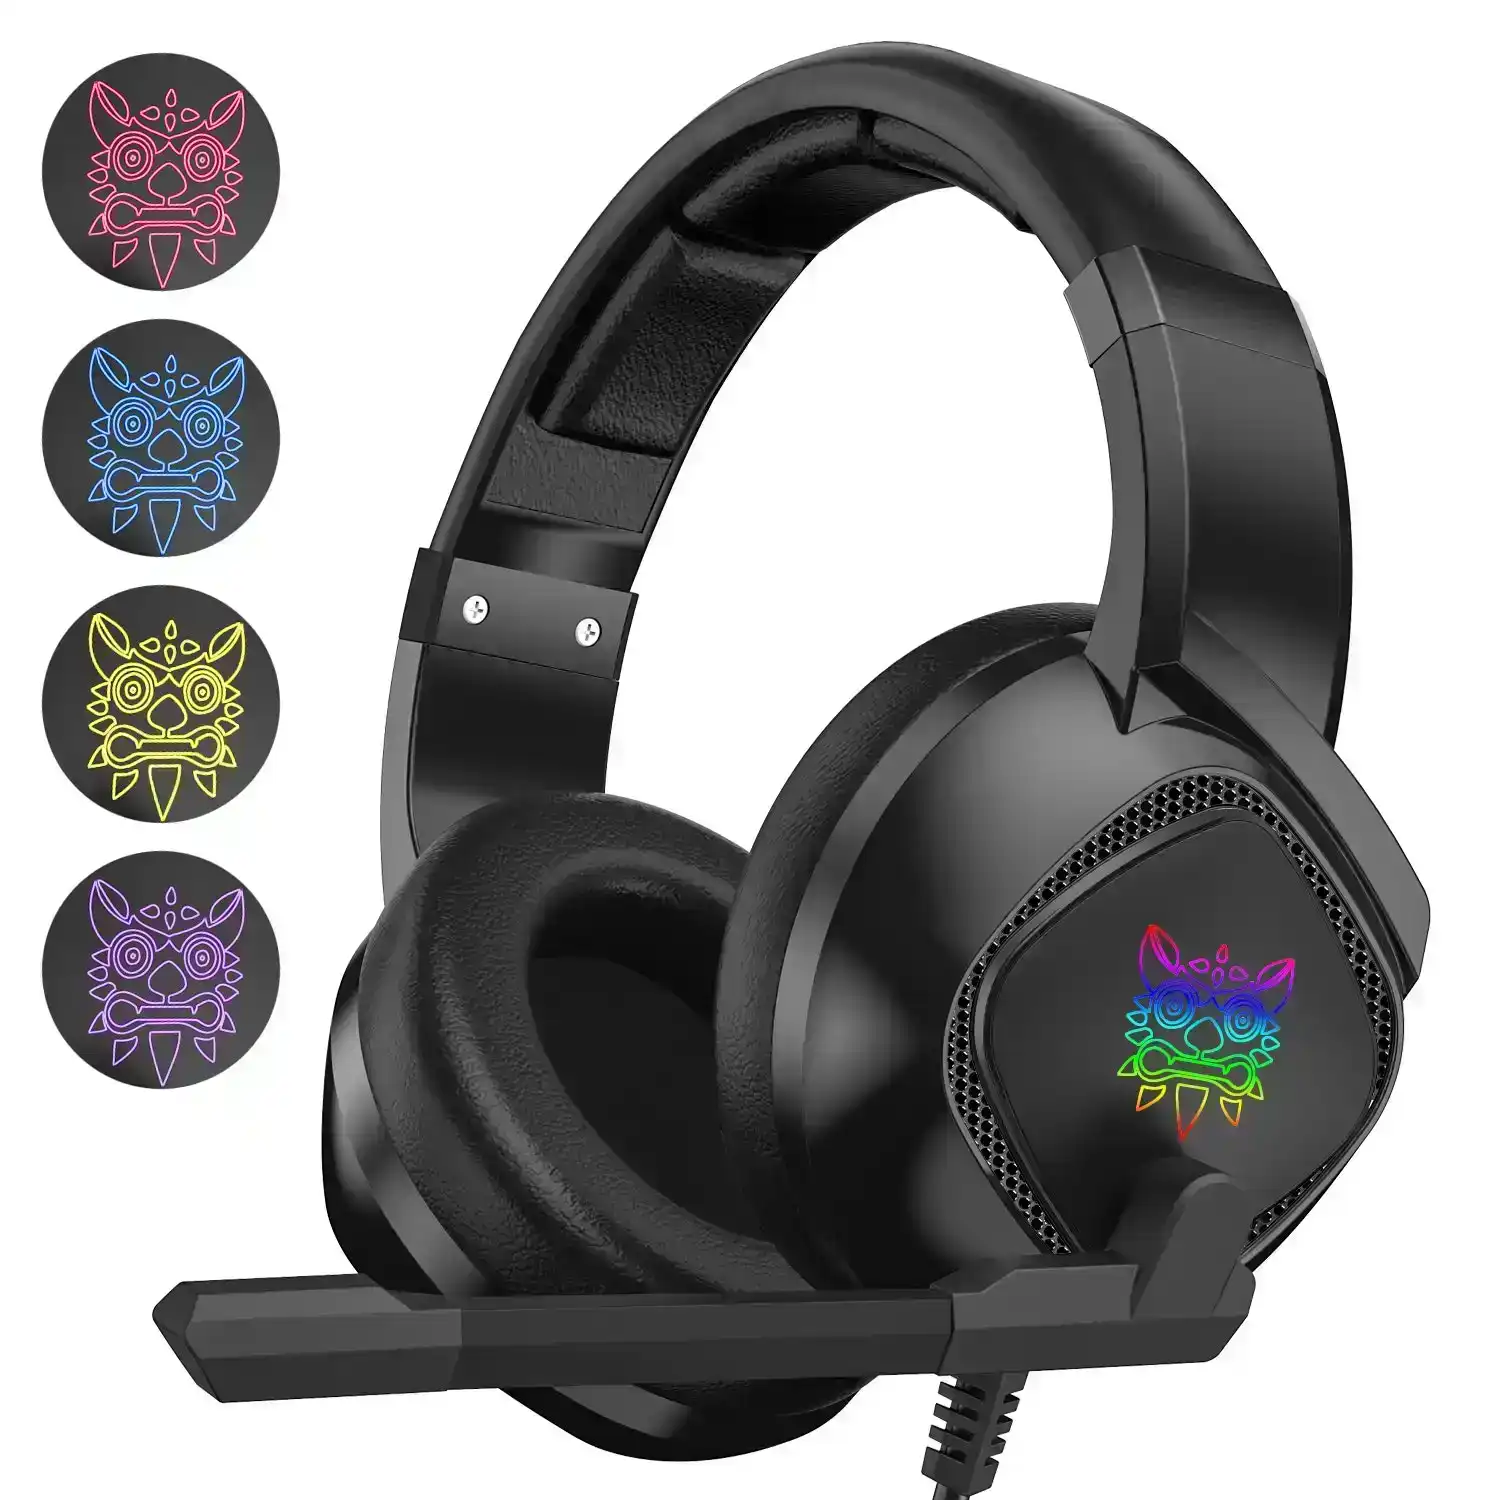 Onikuma K19 RGB Wired Stereo Gaming Headset for PS4/PC/Xbox One Controller/Laptop/iPad/Nintendo Switch Noise Canceling Over-Ear Headphones